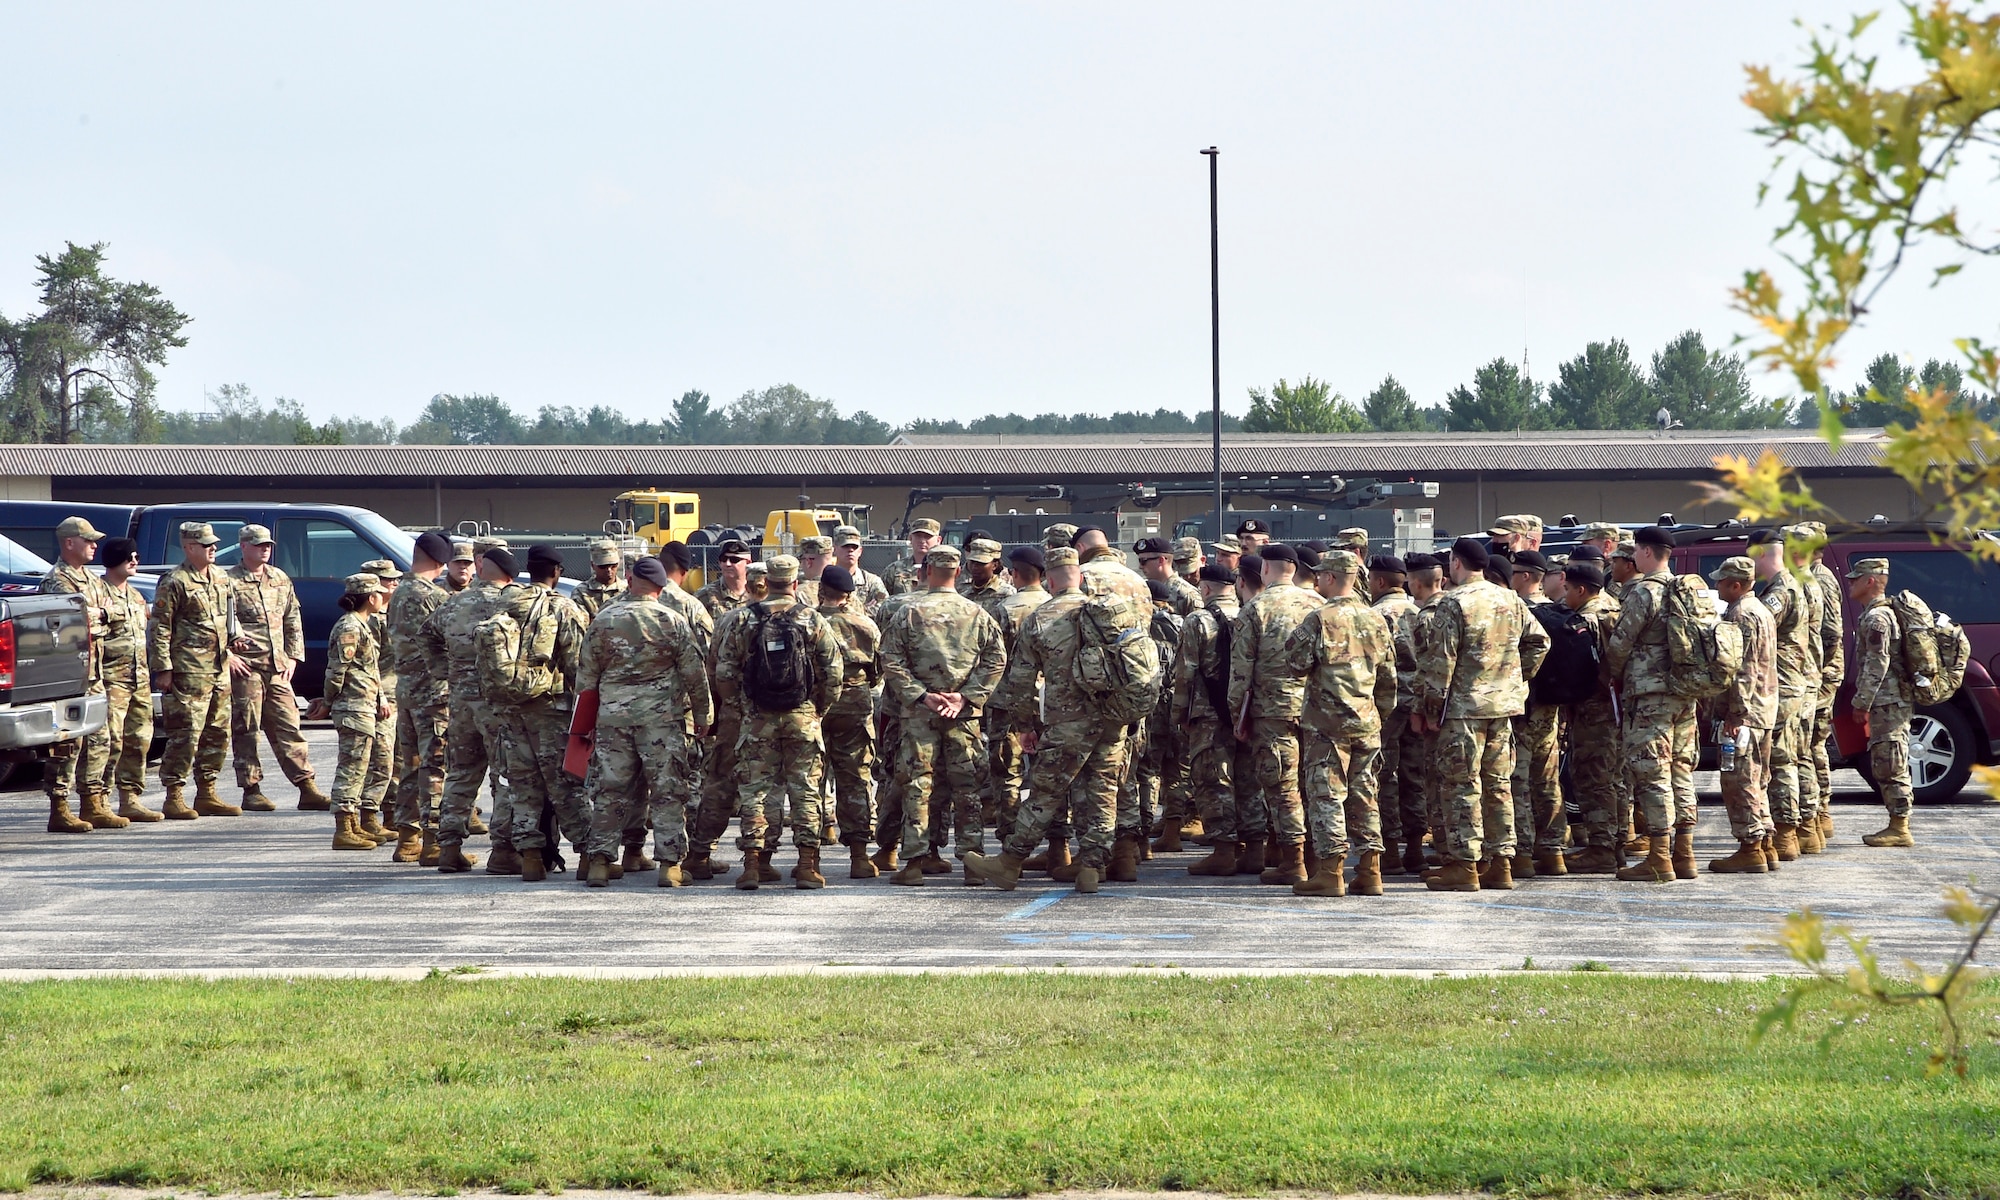 Members of the 127th Security Forces Squadron, Selfridge Air National Guard Base, Michigan, check in with leadership prior to inprocessing at Alpena Combat Readiness Training Center here on July 27, 2021. The defenders arrived to participate in Exercise Spartan, a two weeks long exercise meant to demonstrate the unit’s capability to operate in a contested, degraded and operationally-limited environment, against a near-peer adversary.